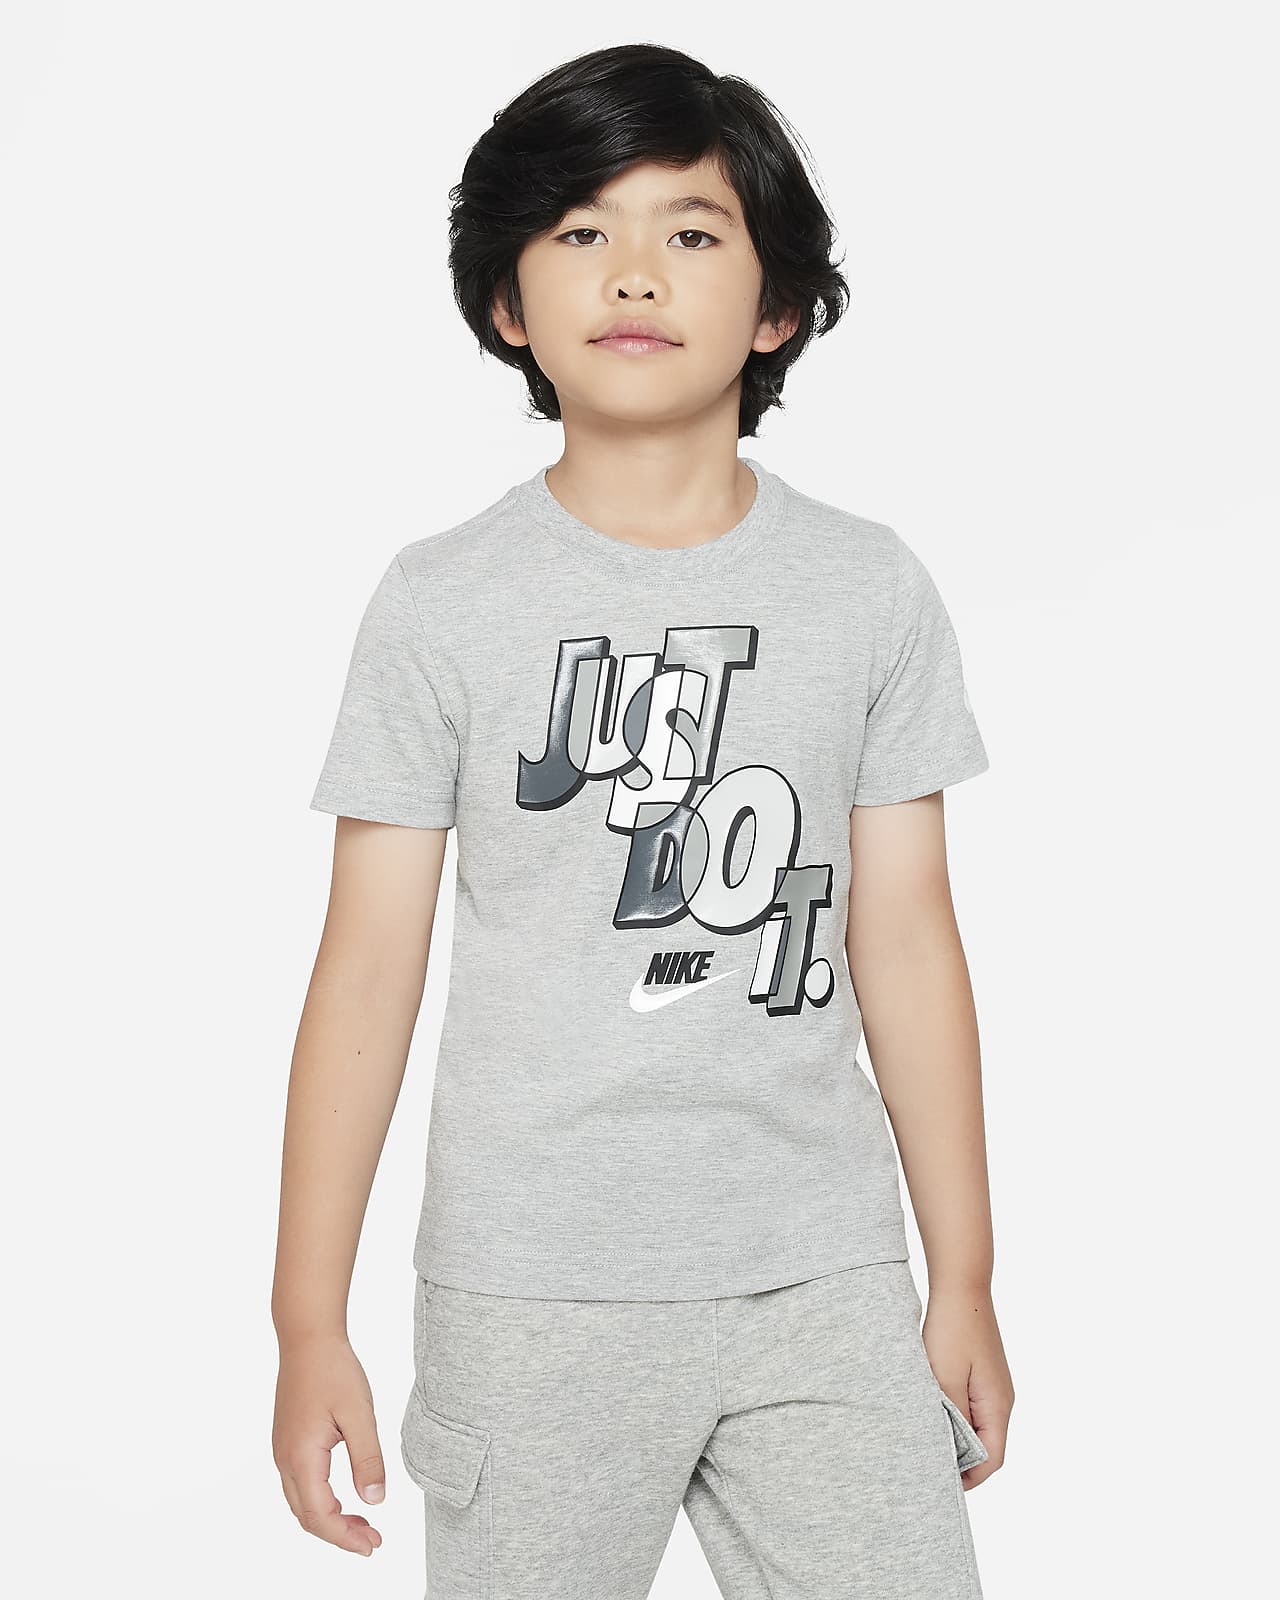 Nike Puzzle "Just Do It" Tee Little Kids T-Shirt